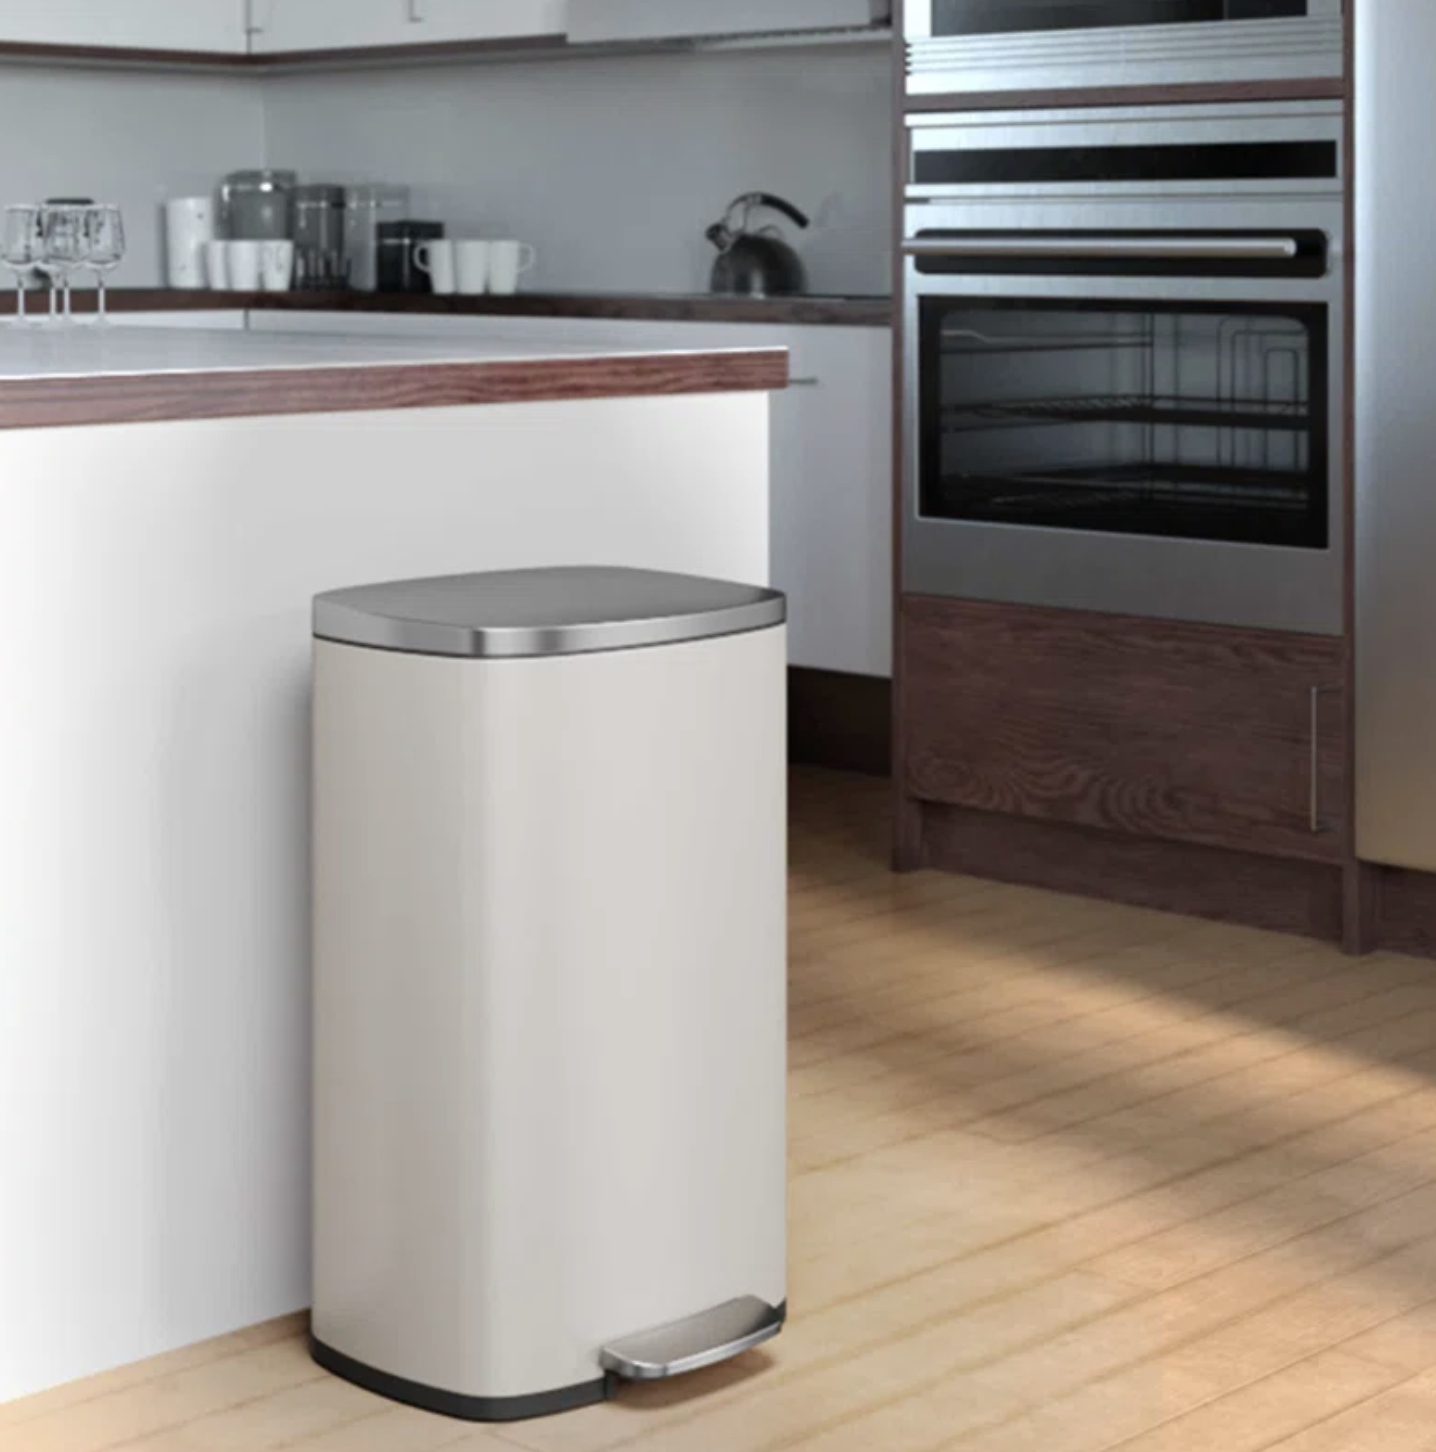 Stainless steel pedal trash can in a modern kitchen setting